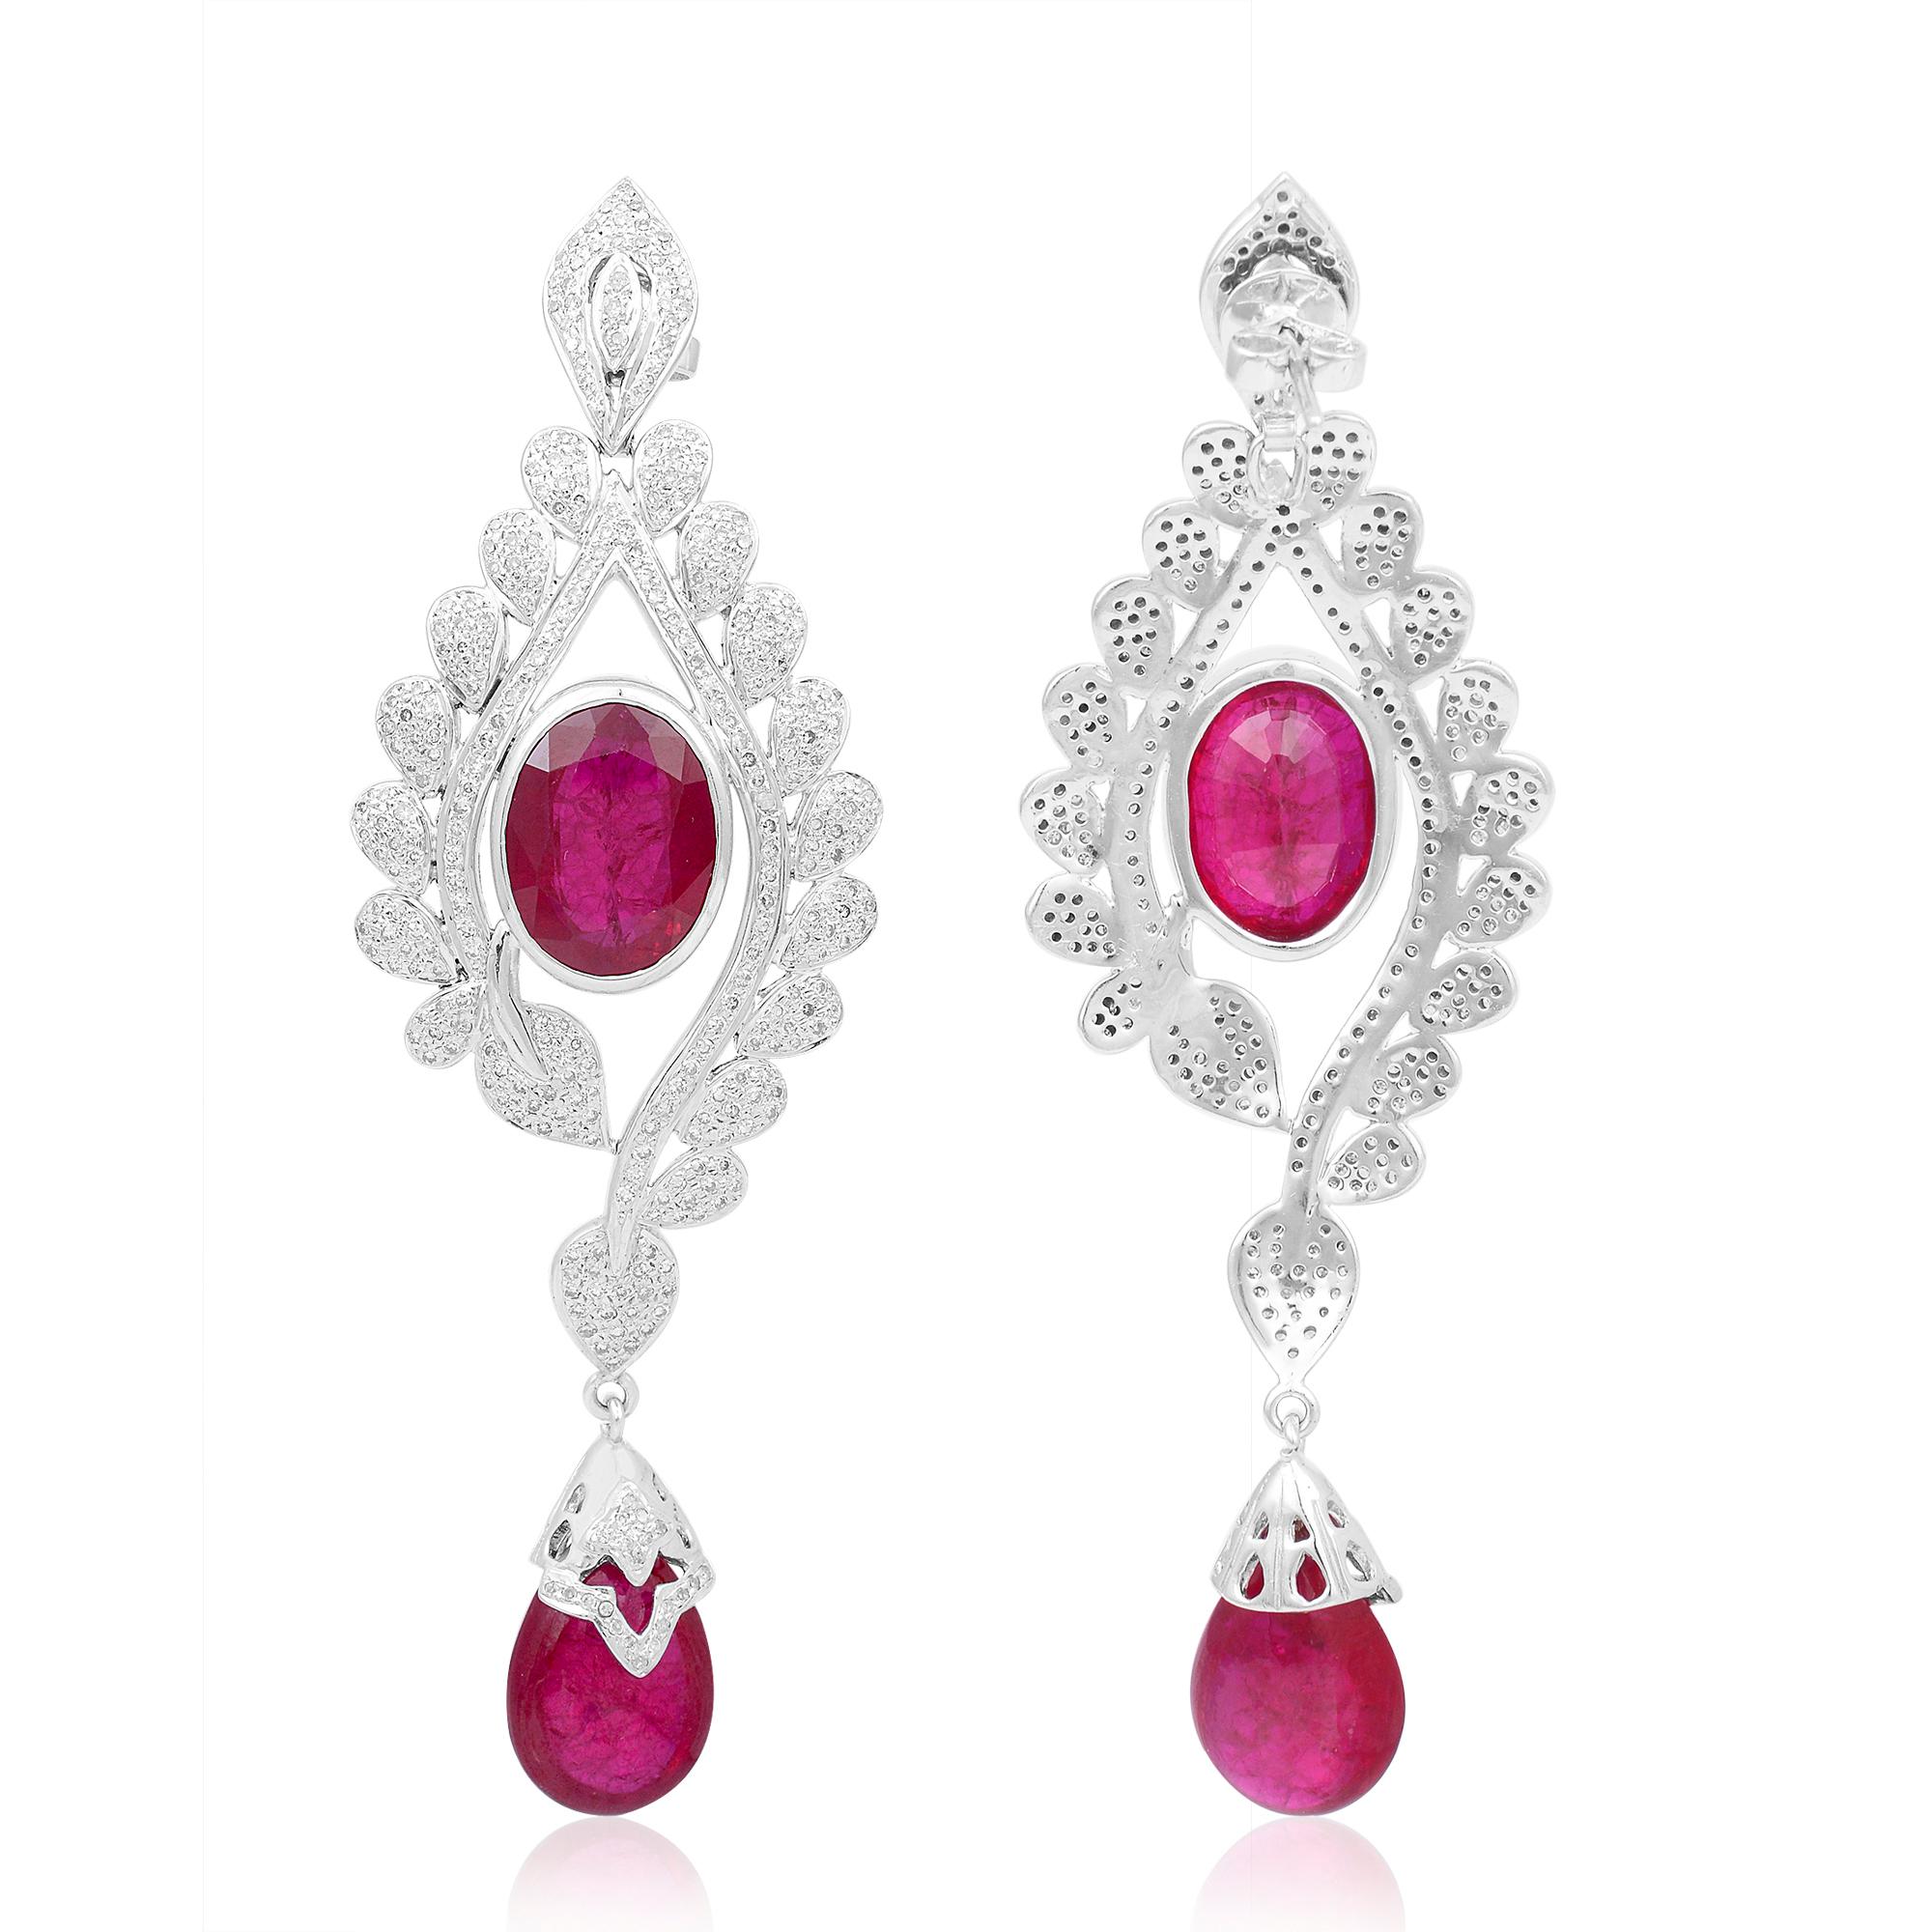 Item Code :- CNS-8119
Gross Wt. :- 34.72 gm
18k Gold Wt. :- 1.47 gm
Silver Wt. :- 23.13 Ct.
Diamond Wt. :- 2.20 Ct.
Synthetic Ruby Wt. :- 48.80 Ct.
Earrings Length :- 81 mm approx.
✦ Sizing
.....................
We can adjust most items to fit your